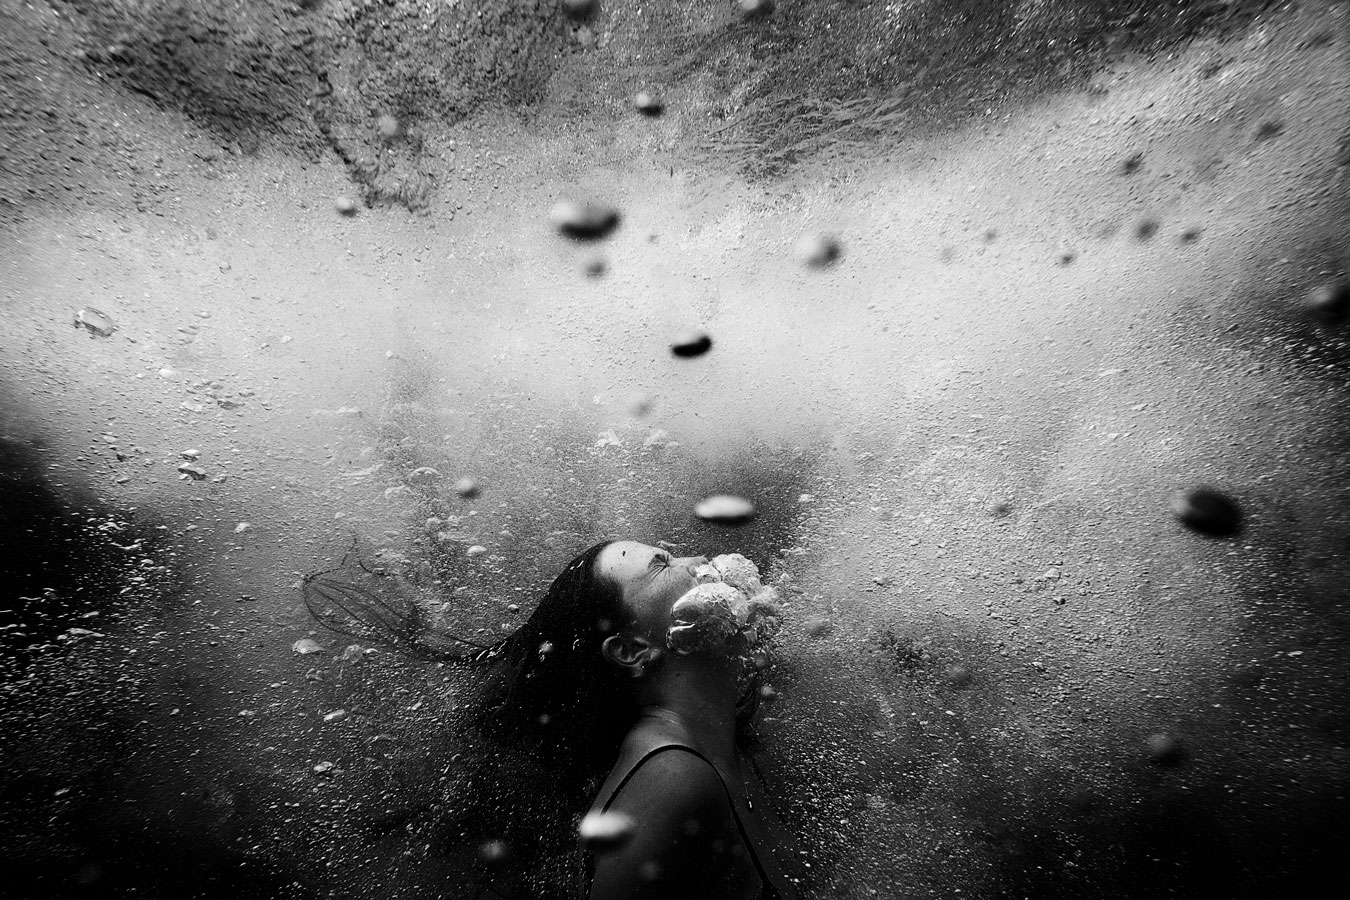 black-and-white-image-of-girls-face-underwater-beginning-to-exhale-large-bubbles-before-breaking-the-surface-to-breathe-again